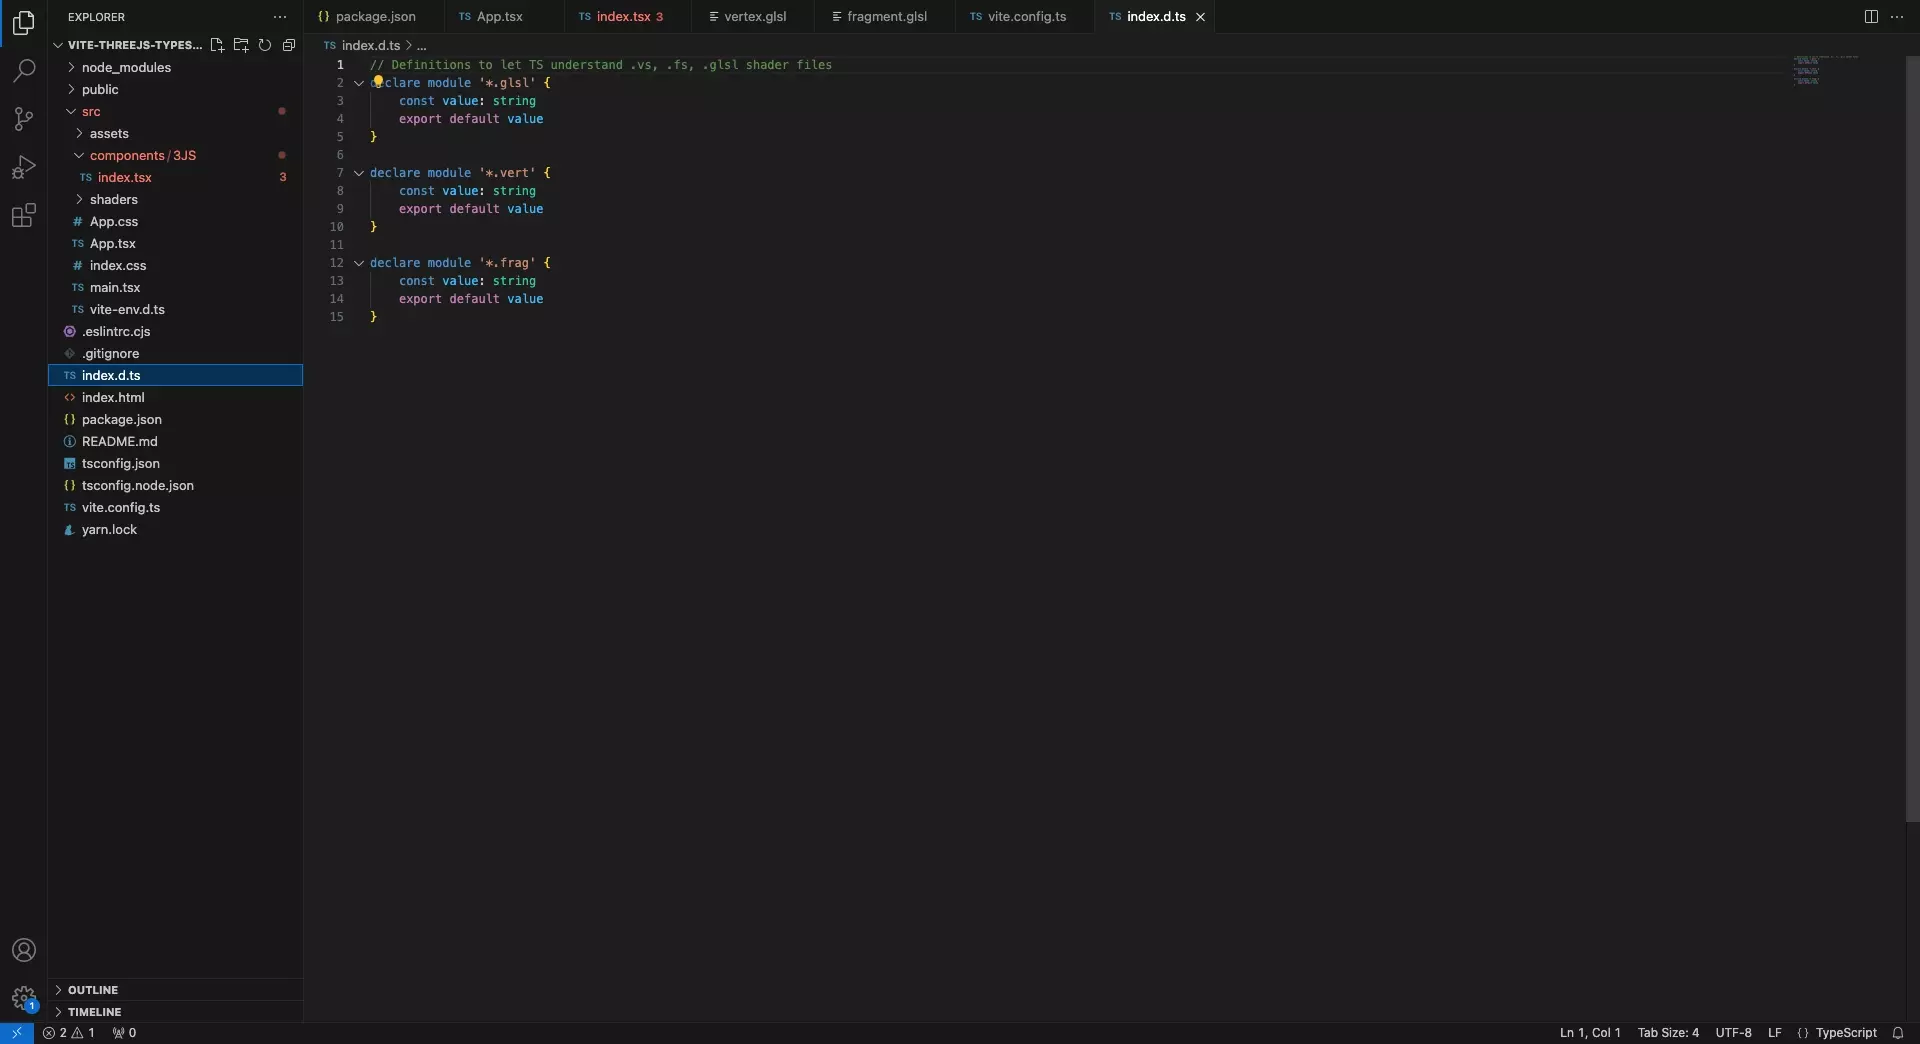 A screenshot of VSCode showing the index.d.ts file.